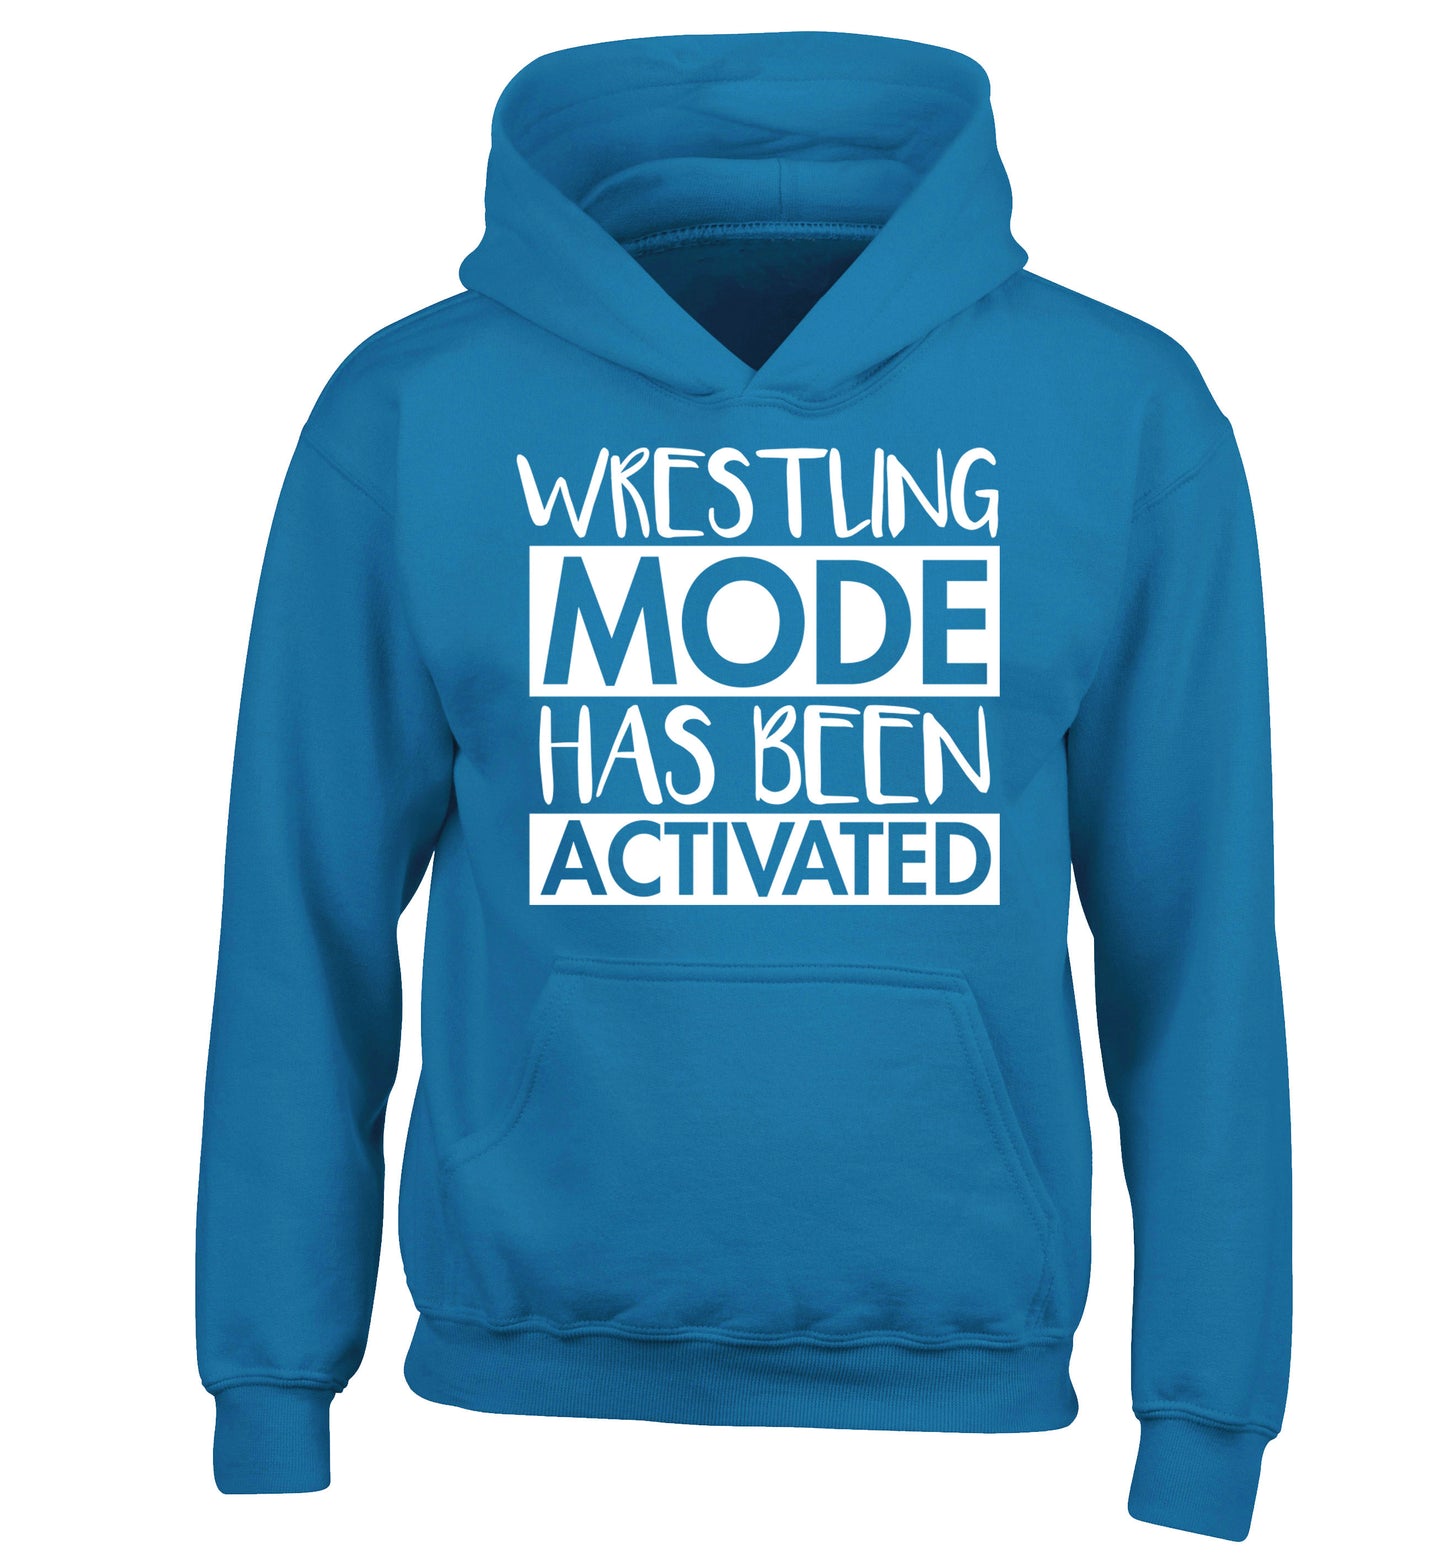 Wresting mode activated children's blue hoodie 12-14 Years